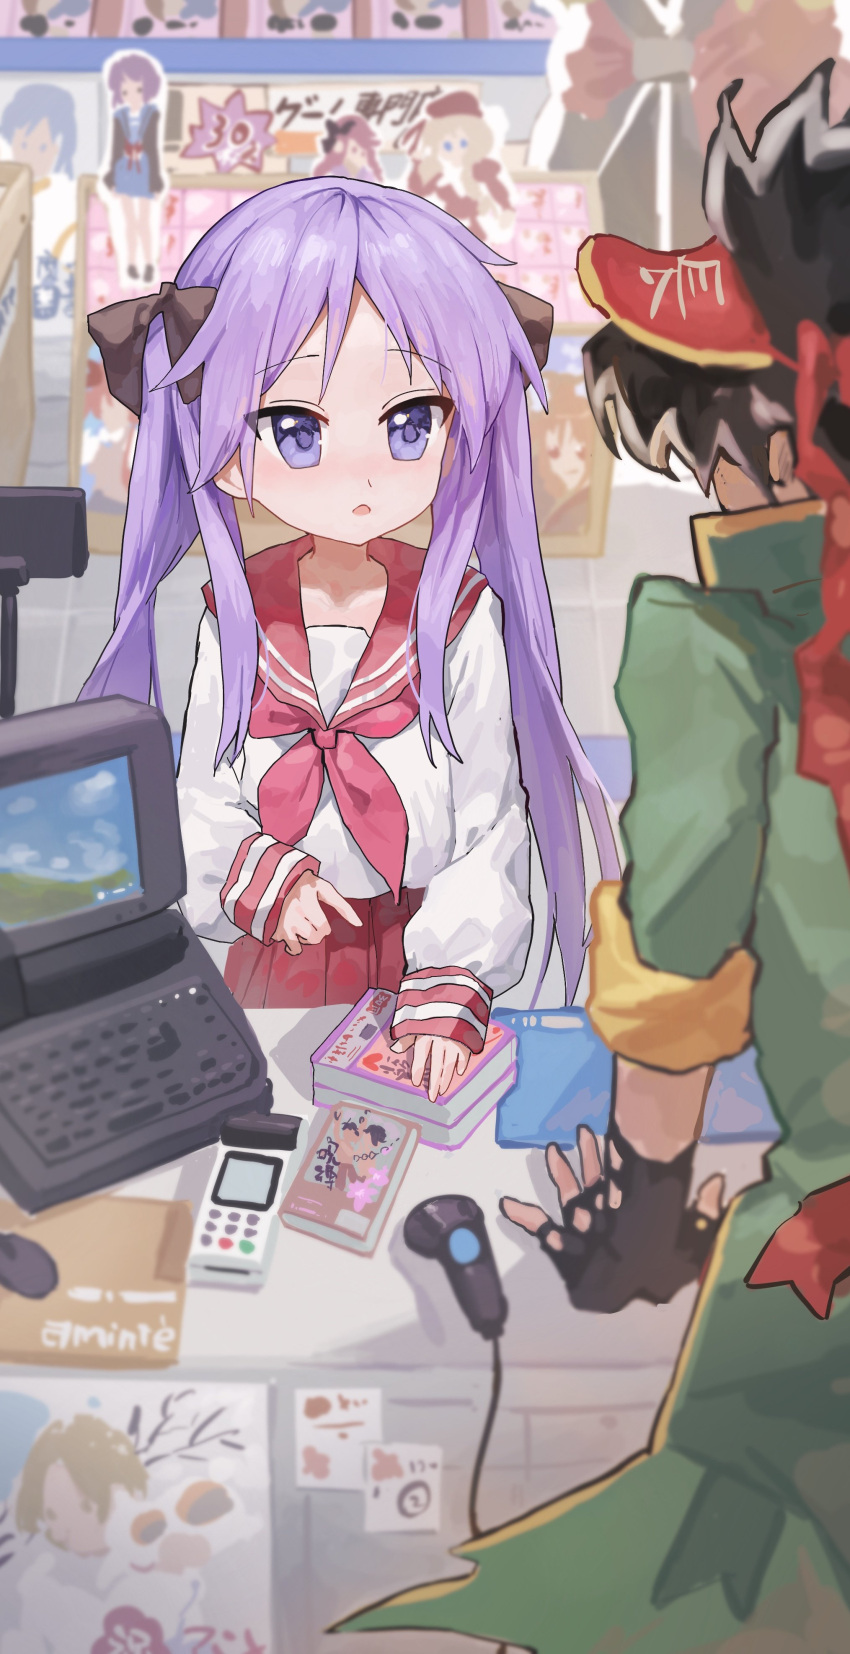 1girl absurdres anime_tenchou anisawa_meito blush cashier coat fingerless_gloves gloves green_coat highres hiiragi_kagami lucky_star manga_(object) mouse_(computer) nagato_yuki open_mouth pointing poster_(object) purple_hair red_sailor_collar red_skirt sailor_collar sentter shop skirt suzumiya_haruhi_no_yuuutsu violet_eyes